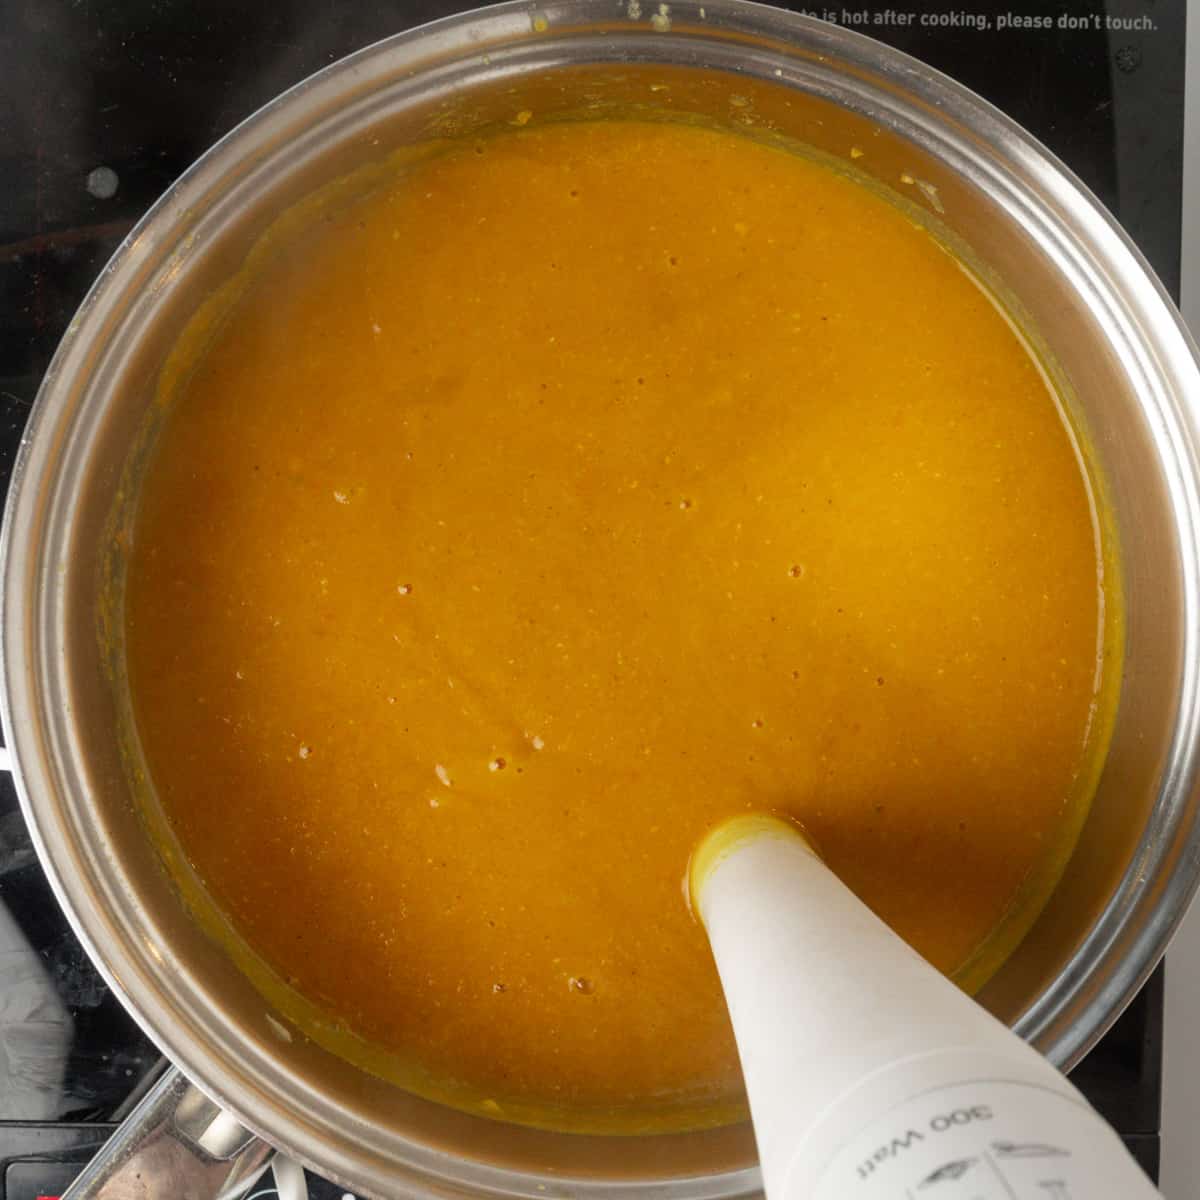 An immersion blender liquidizing a smooth orange coloured soup in a saucepan.